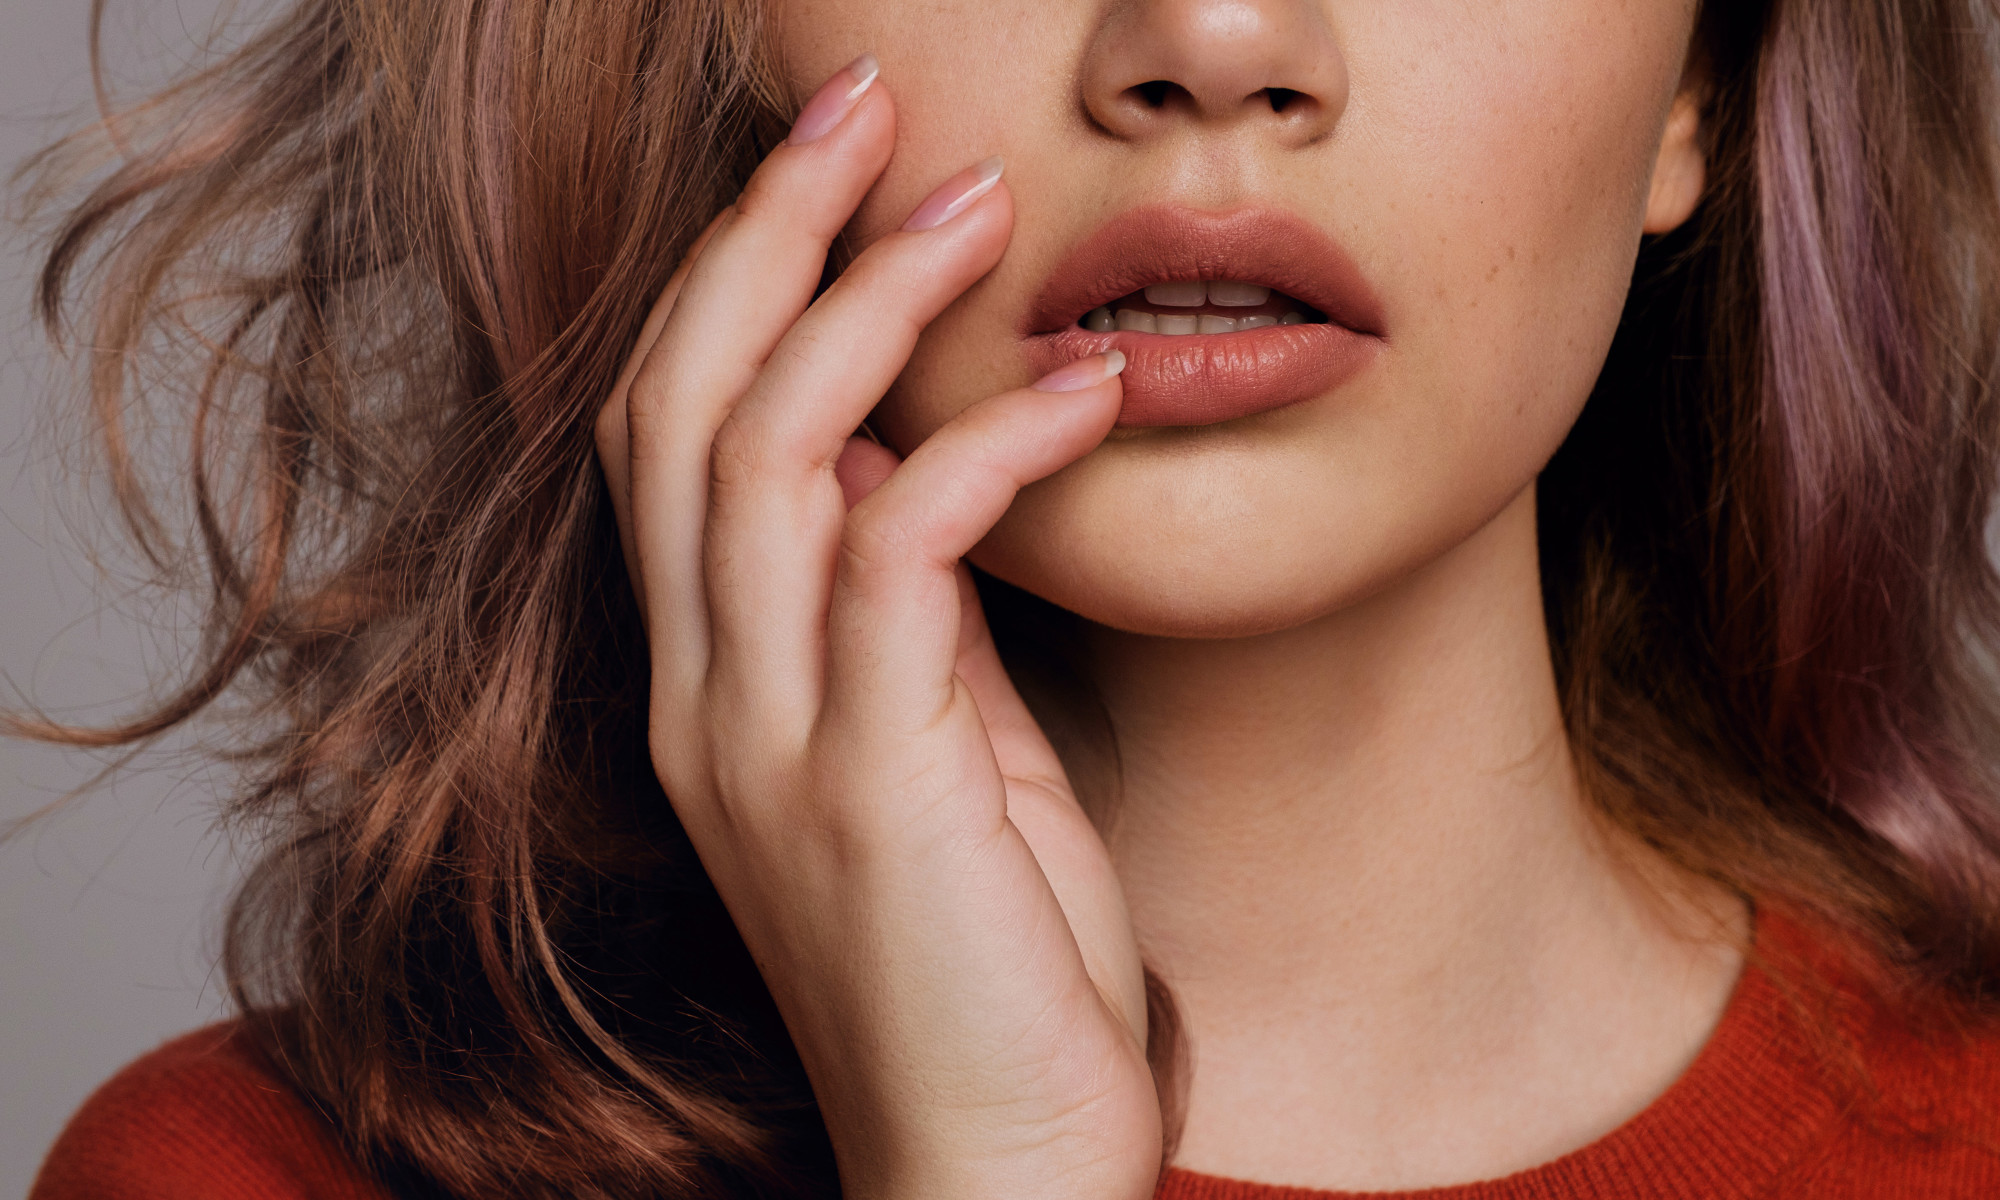 Use This No-Fuss Trick for Fuller Looking Lips & Enhanced Lip Color